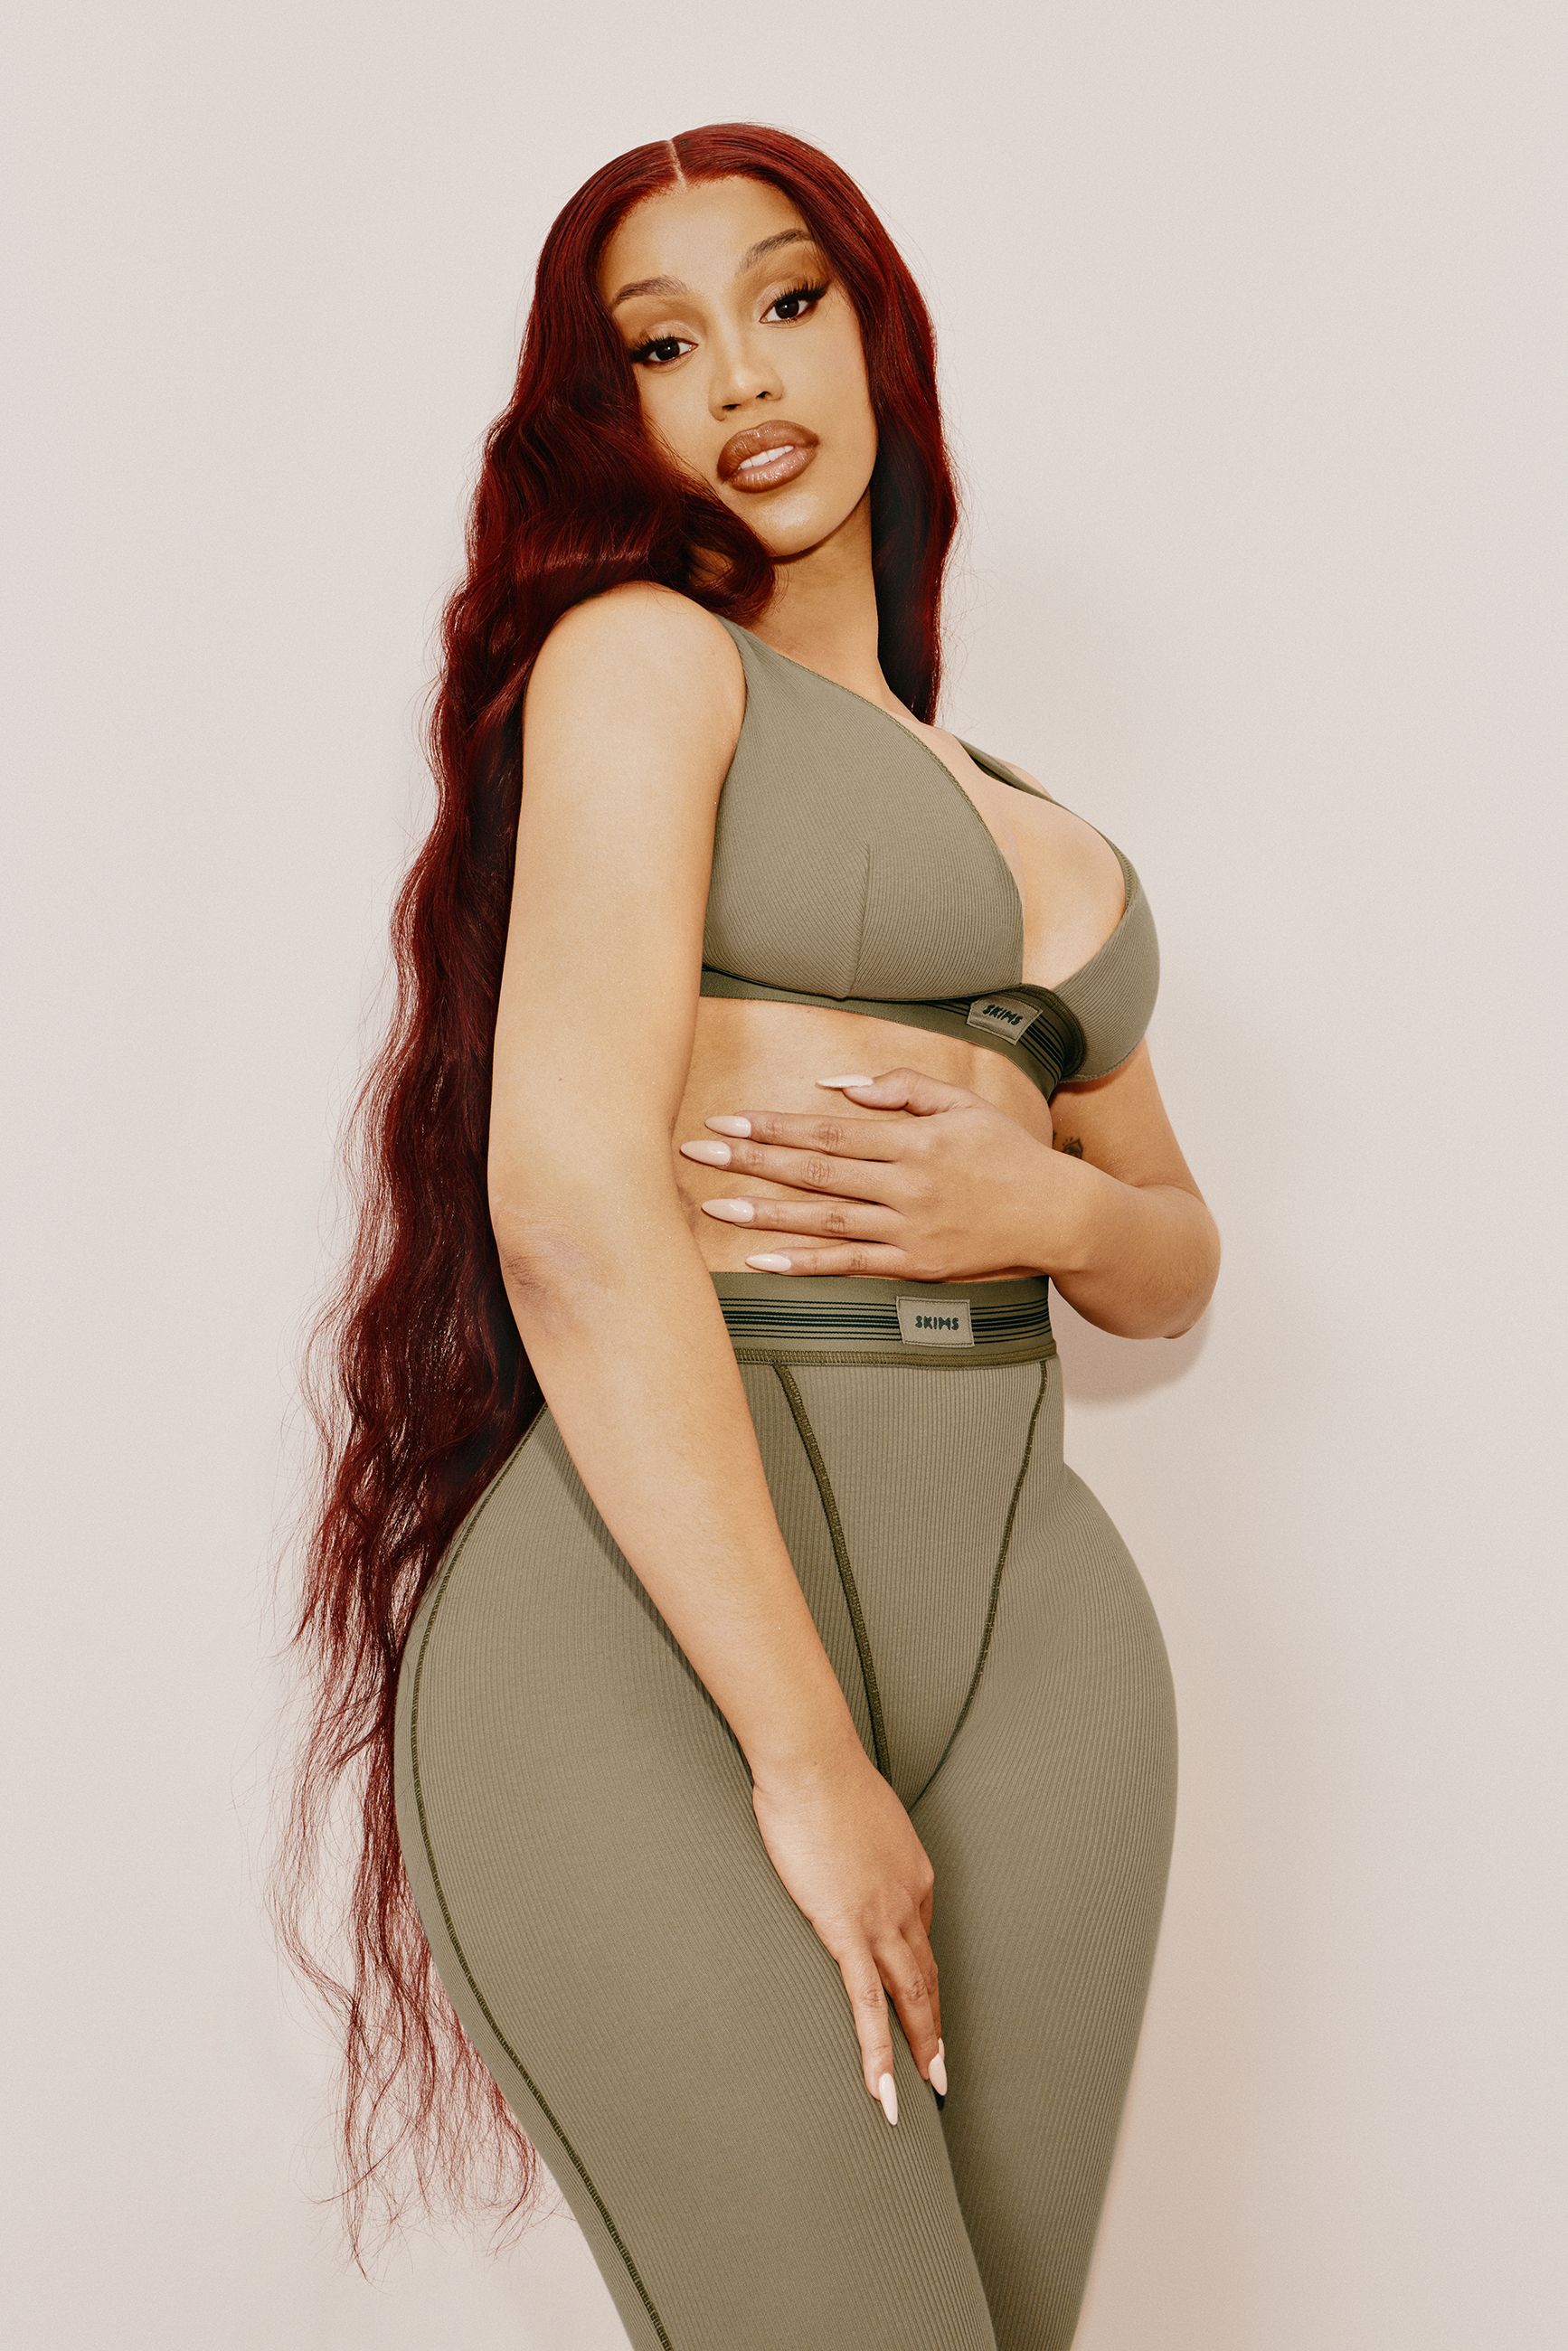 Exclusive: Cardi B Talks About Her New Campaign With SKIMS